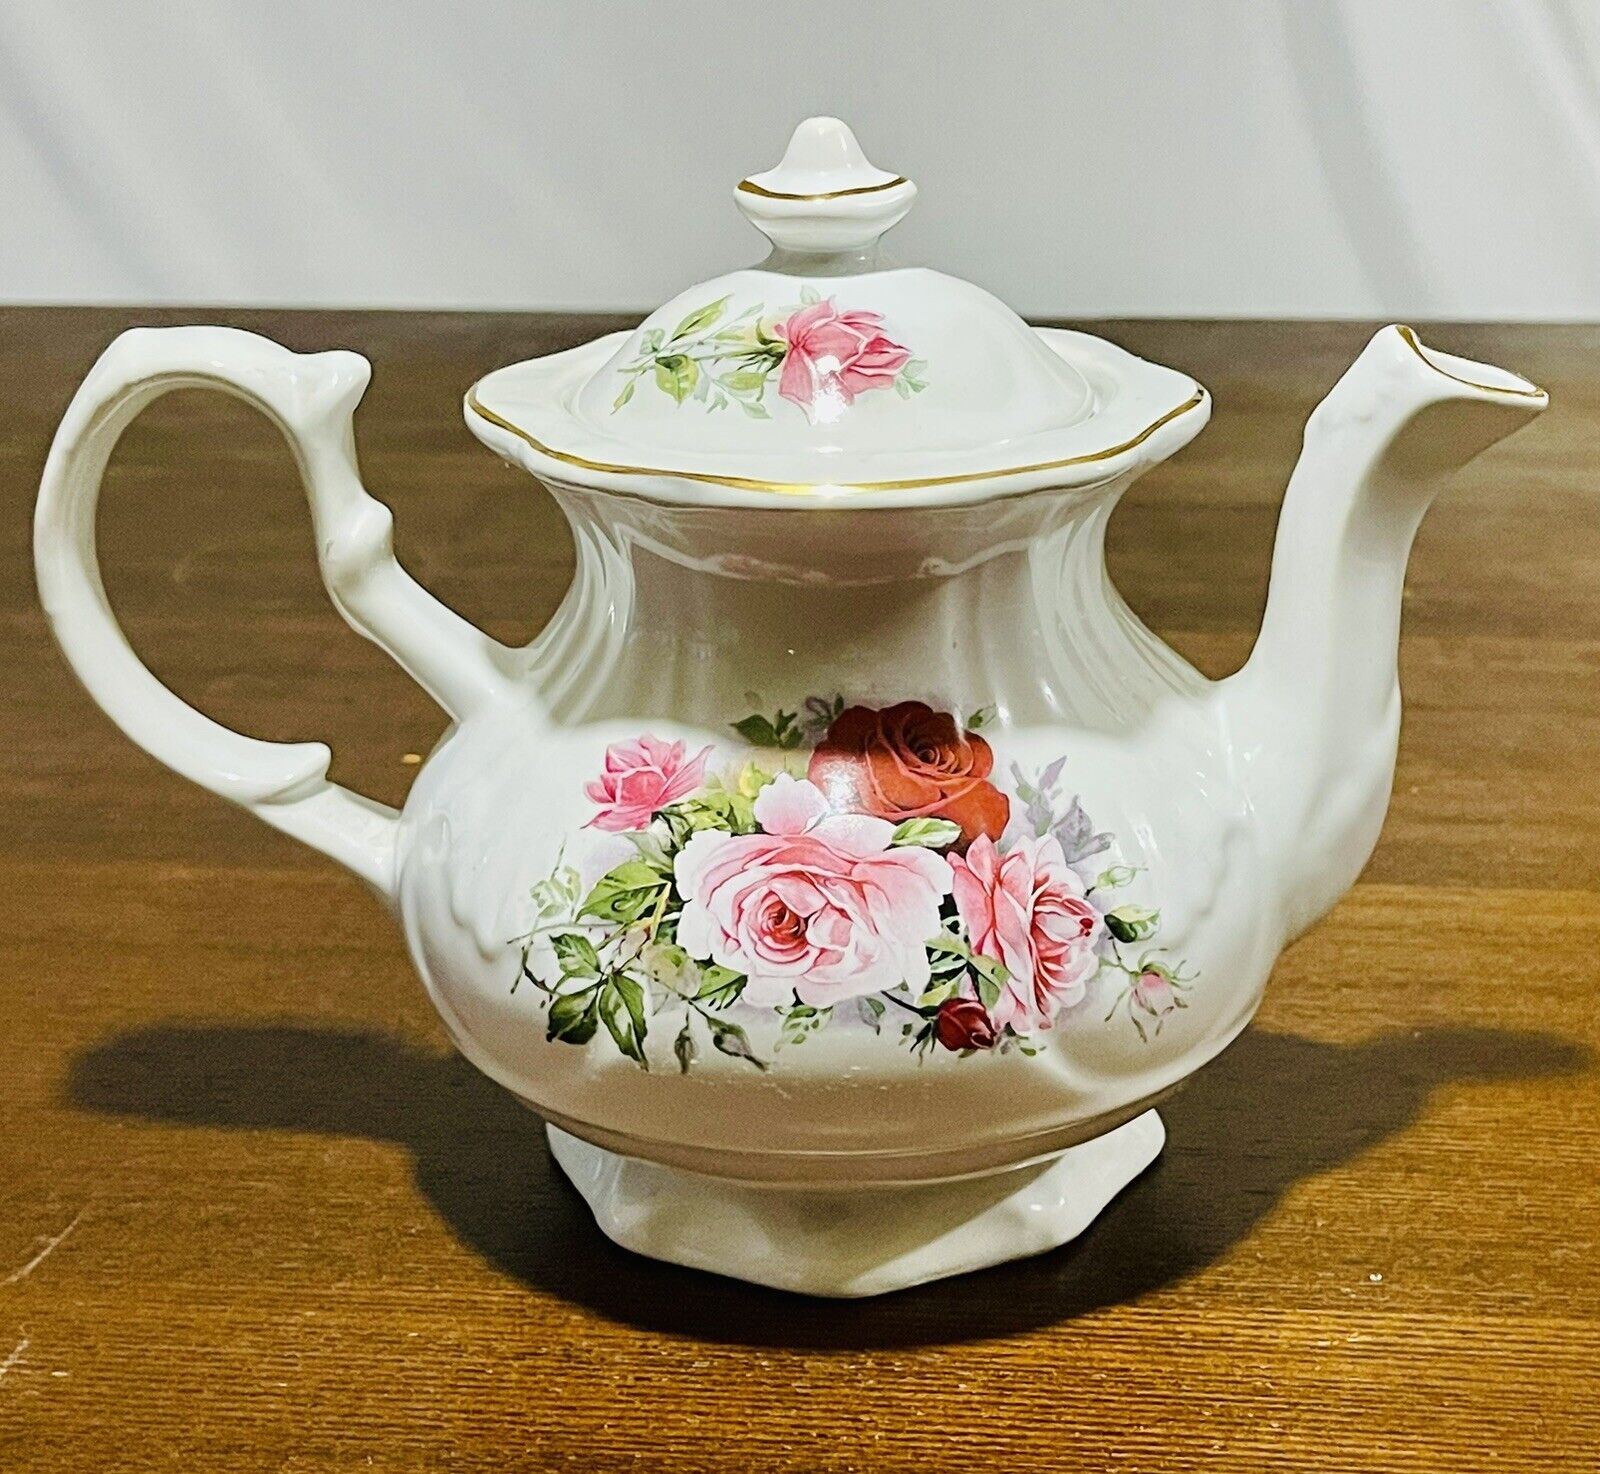 Vintage Summertime Rose by Allyn Nelson Teapot With Gold Trim No Cracks/Crazing